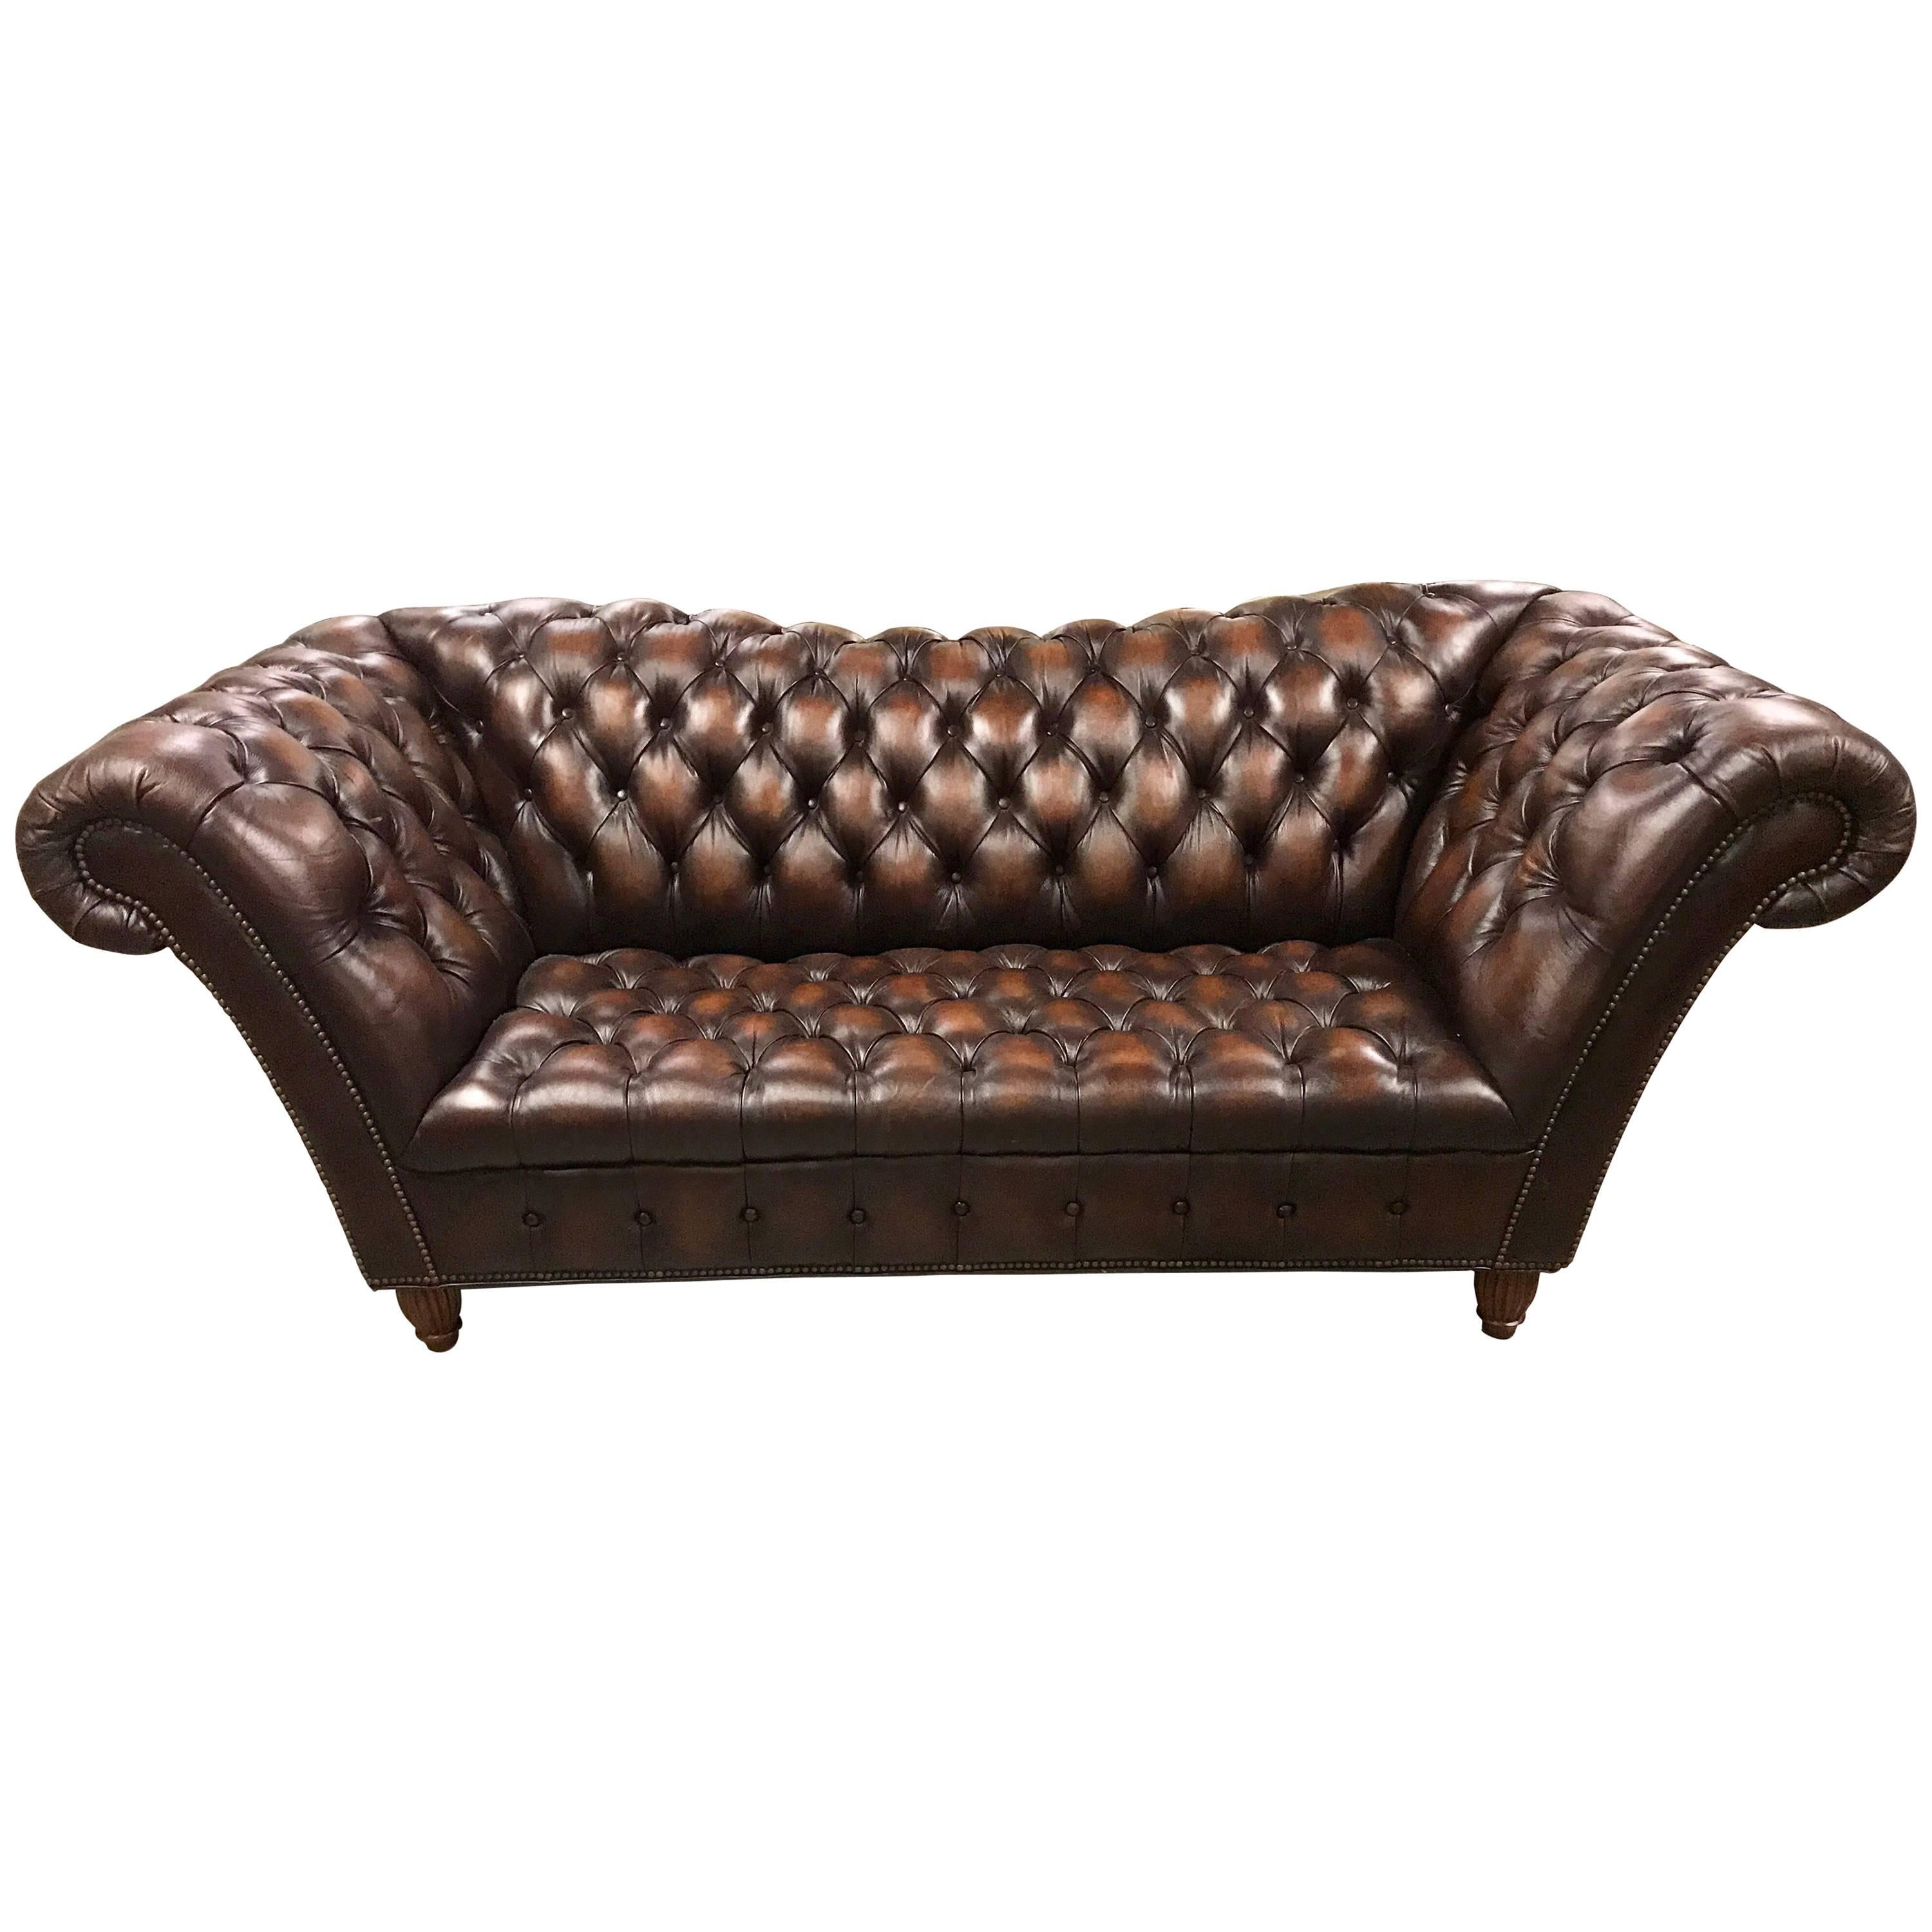 Sumptuous Leather Chesterfield Sofa with Rolled Arms